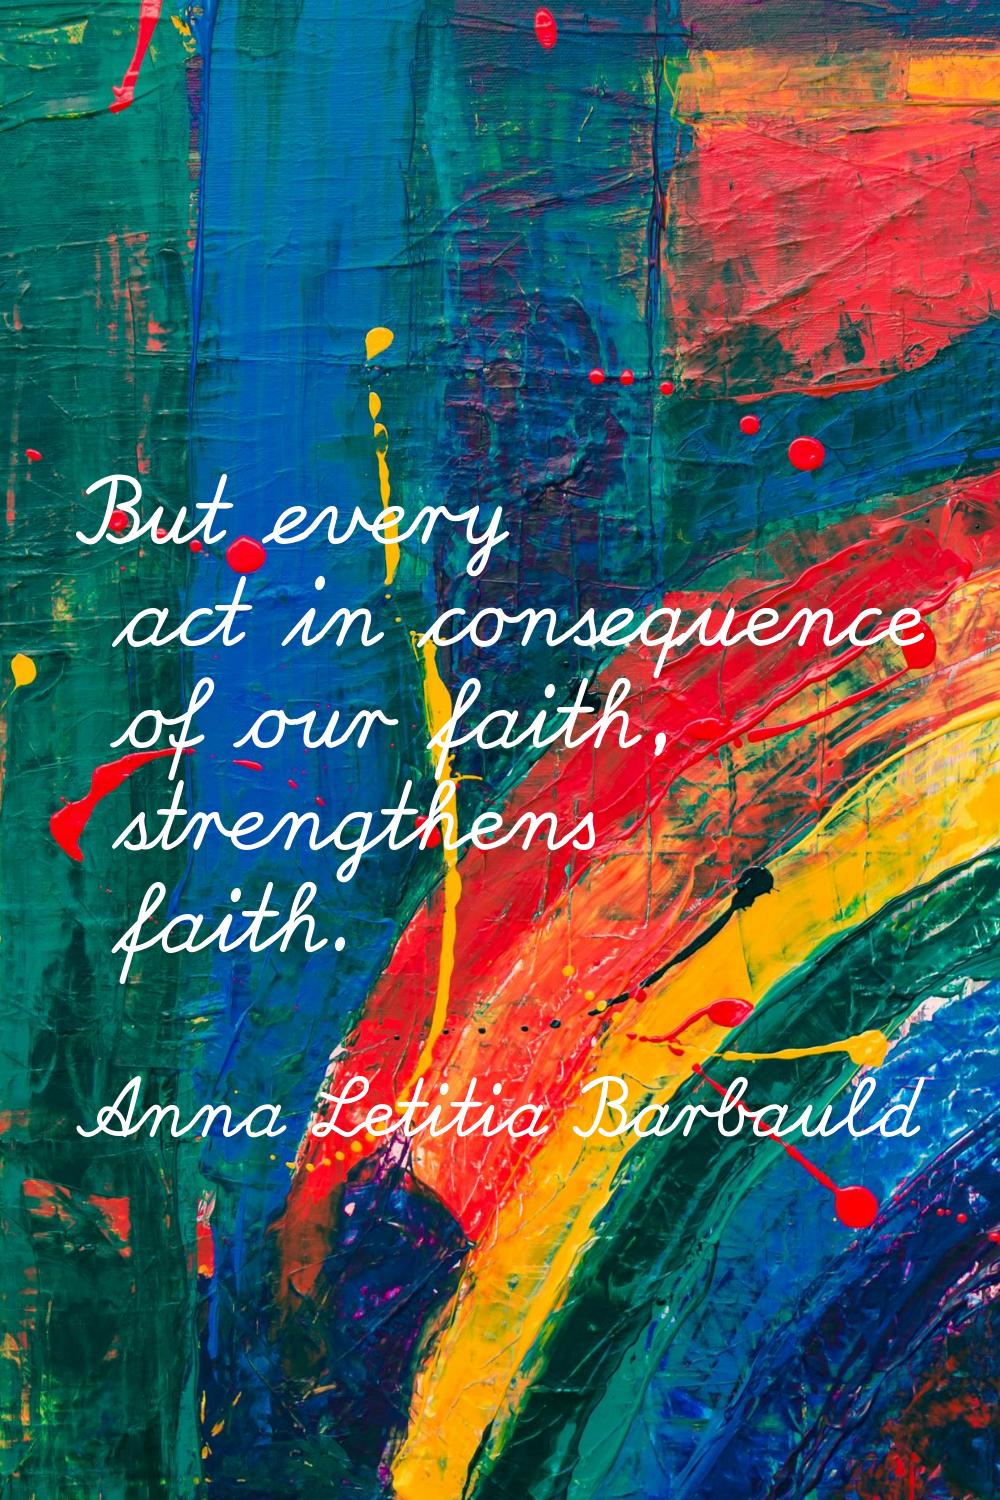 But every act in consequence of our faith, strengthens faith.